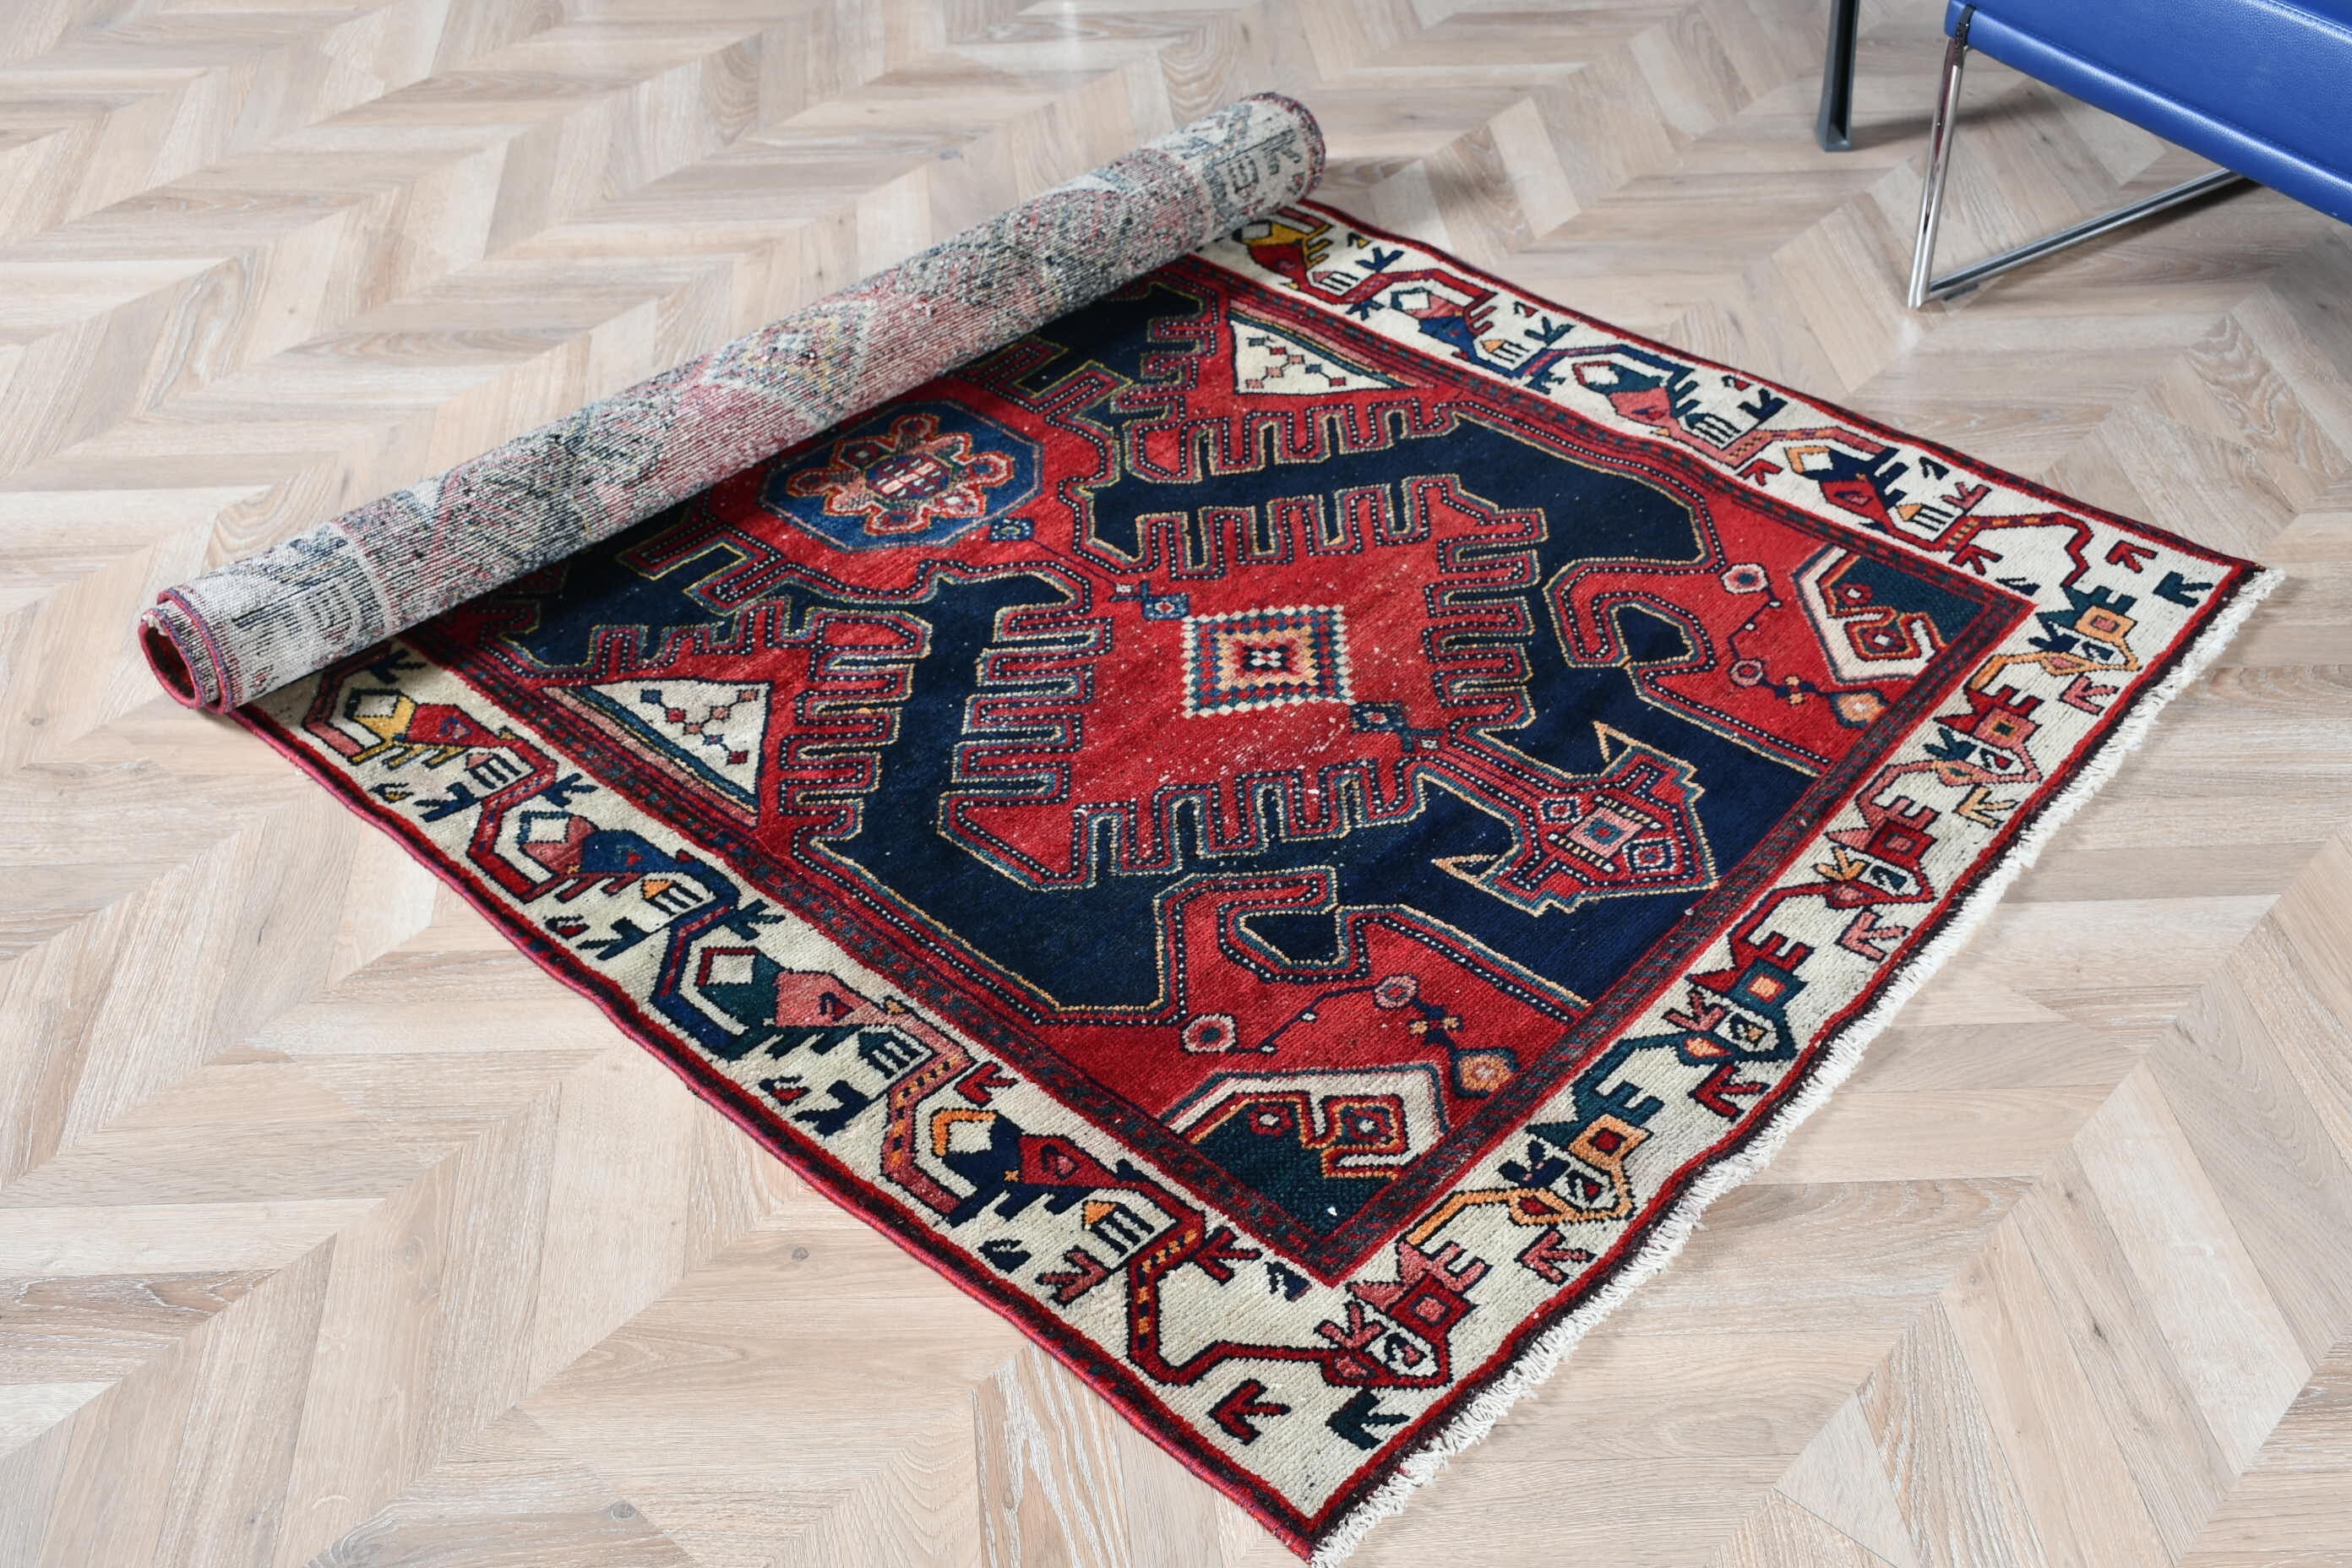 Red Bedroom Rugs, Turkish Rugs, Nursery Rug, Anatolian Rugs, Home Decor Rug, Rugs for Kitchen, Vintage Rug, 3.9x6.1 ft Accent Rugs, Old Rug